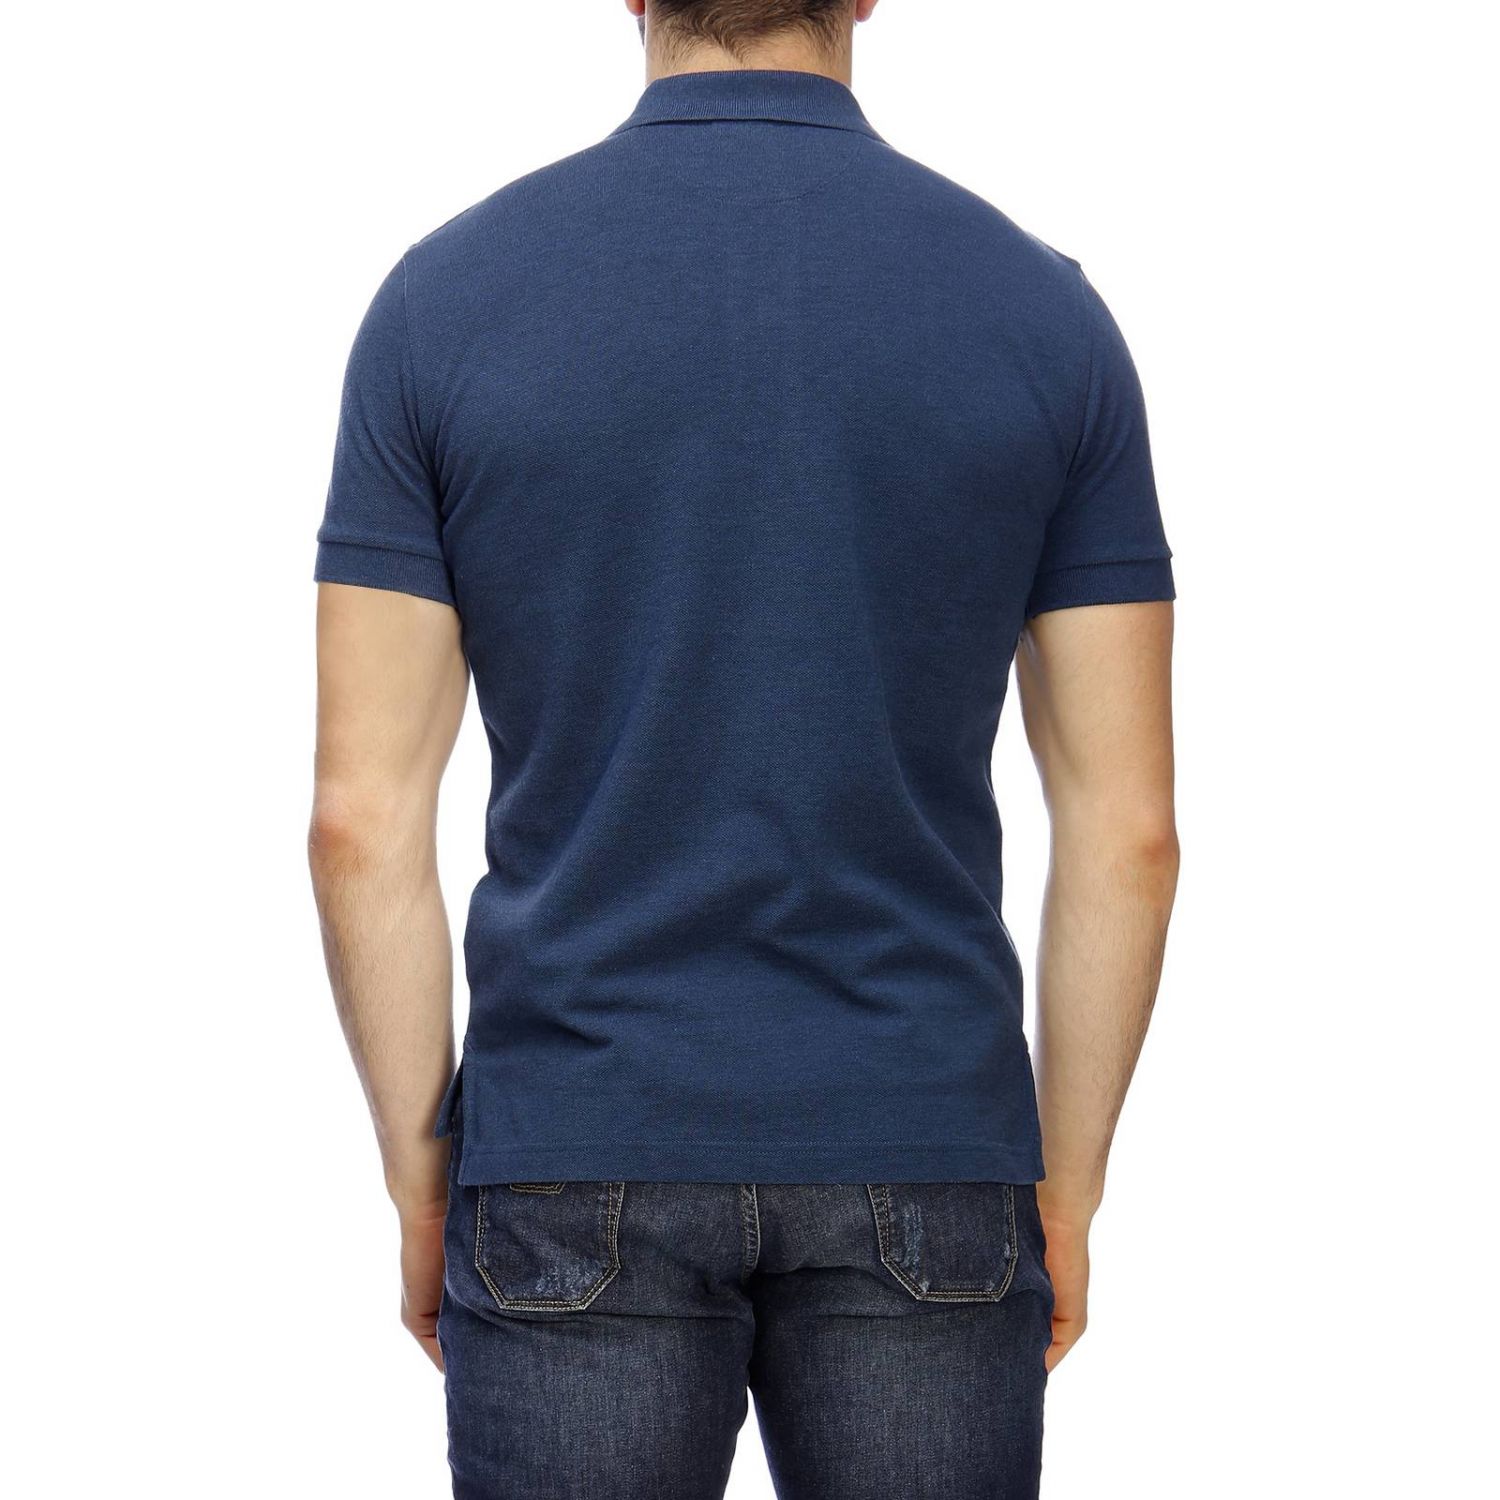 Brooks Brothers Outlet: t-shirt for man - Avion | Brooks Brothers t ...